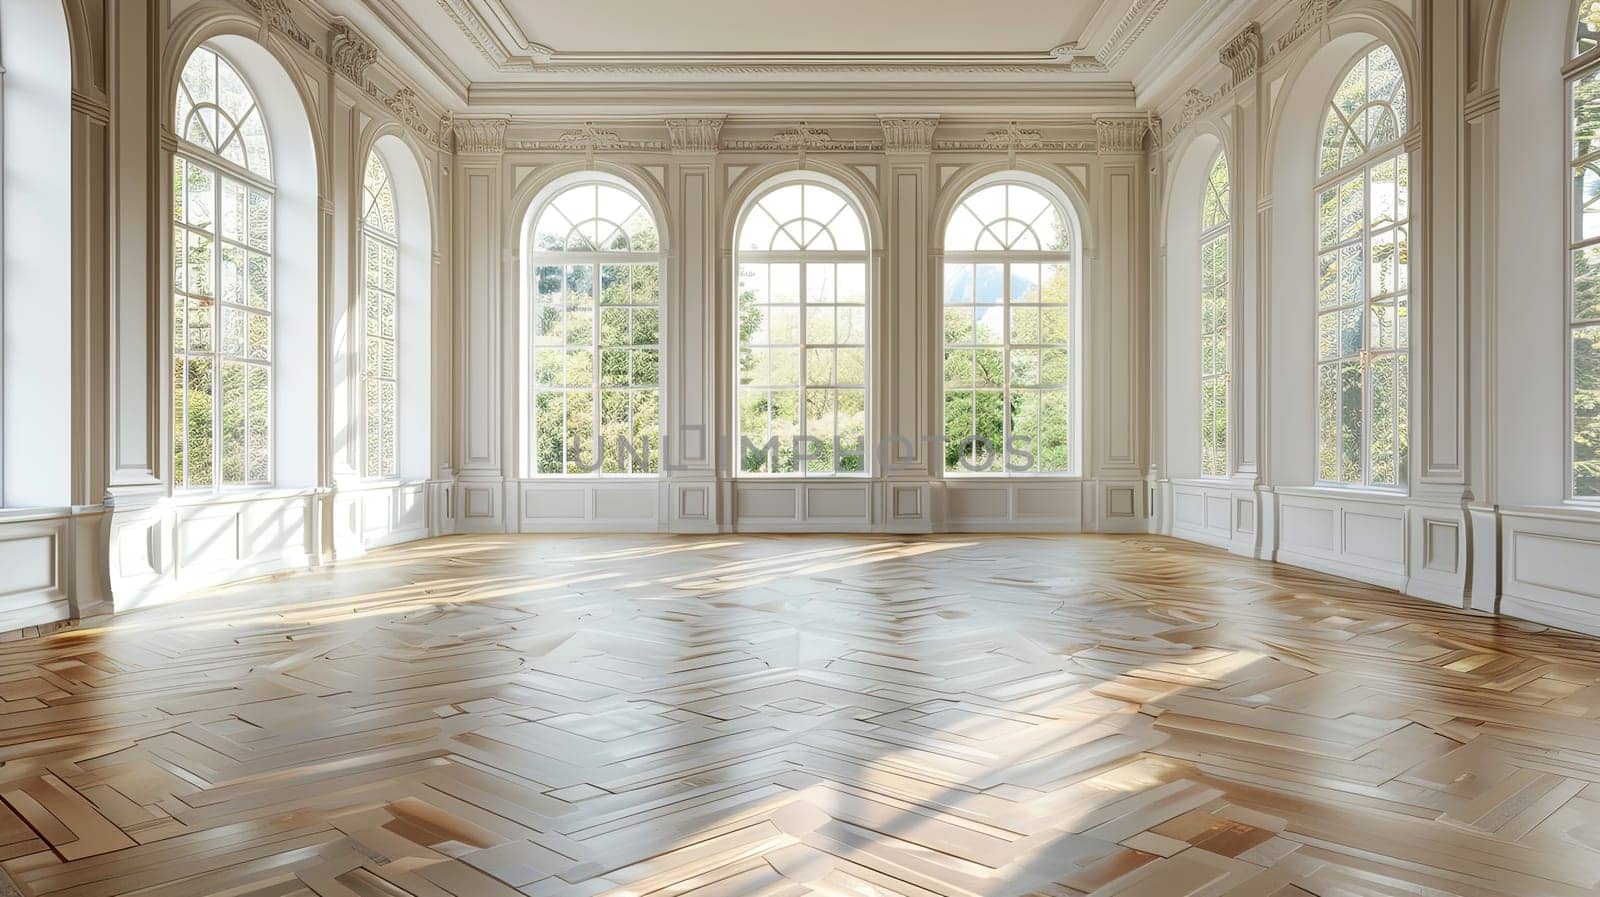 Vintage-style banquet hall featuring a parquet floor, with ample natural light streaming in through large windows.